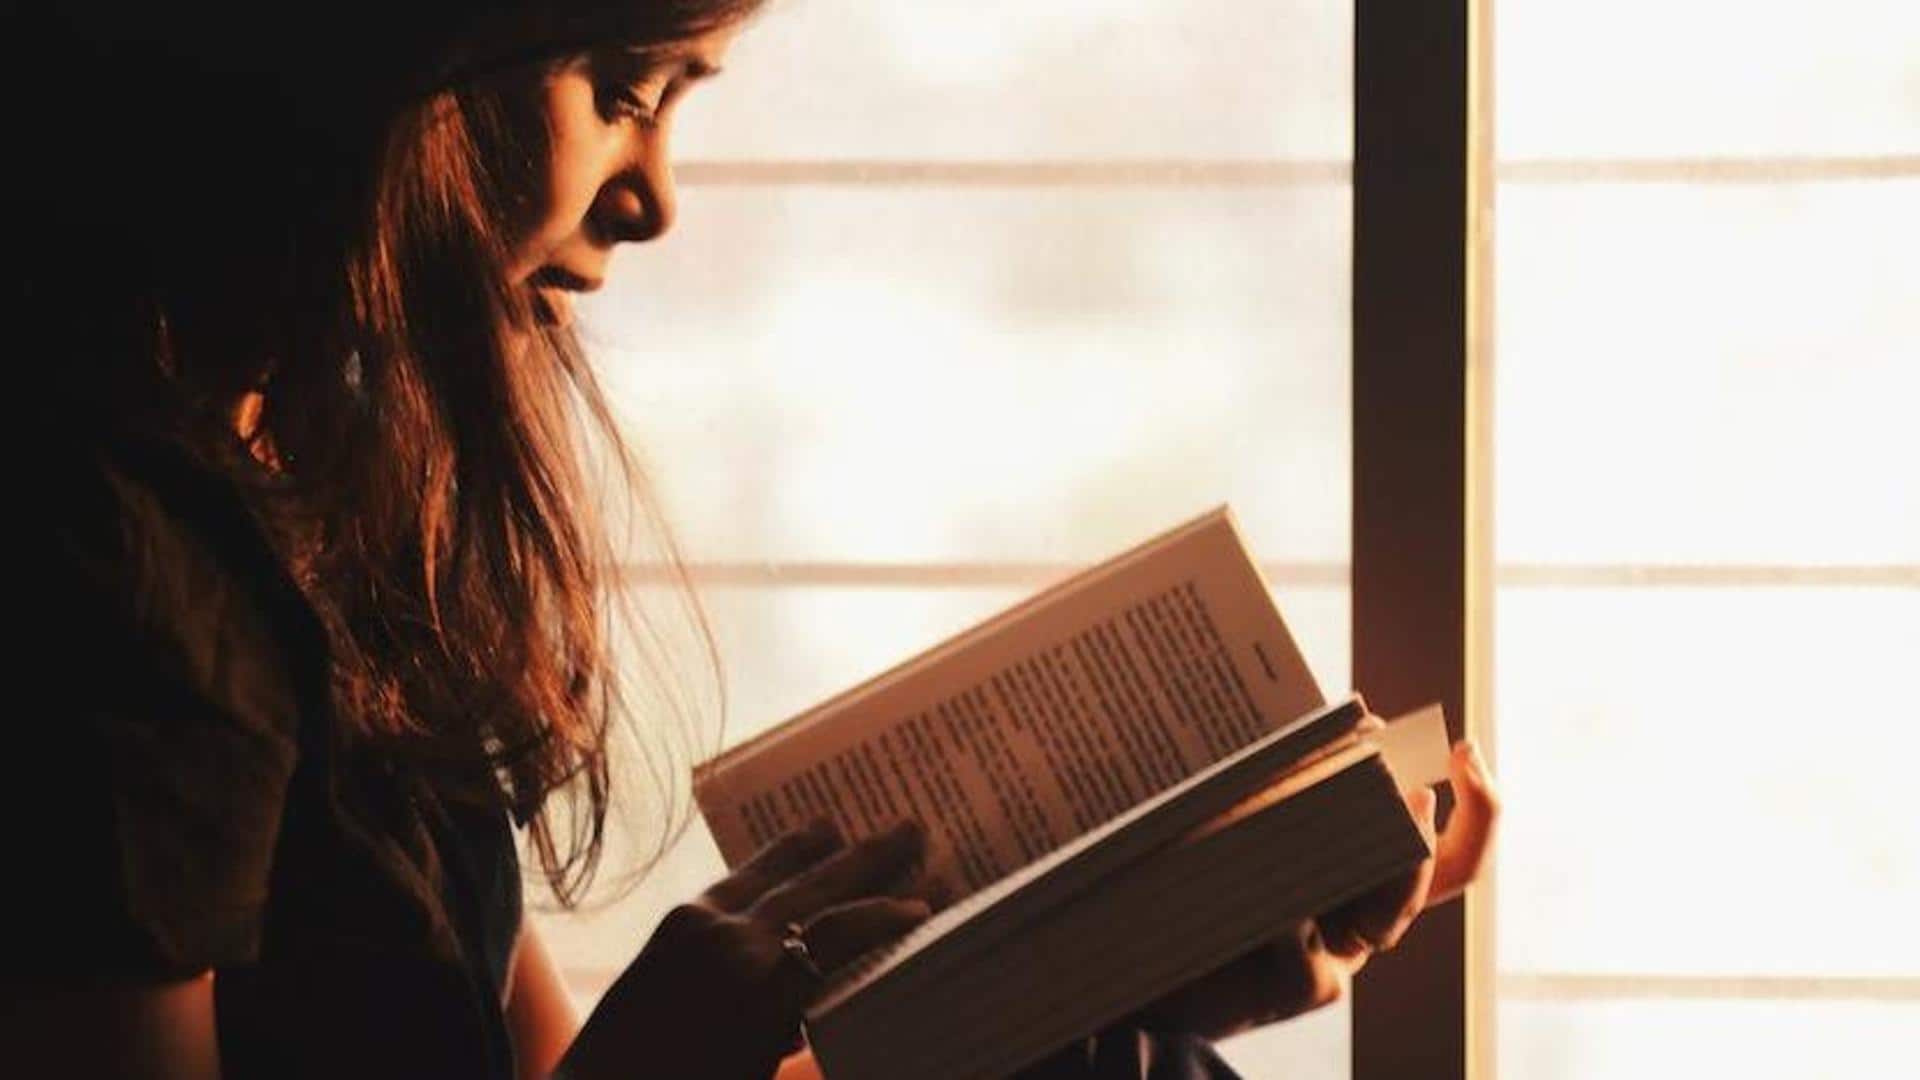 World Book Day: How to develop the habit of reading